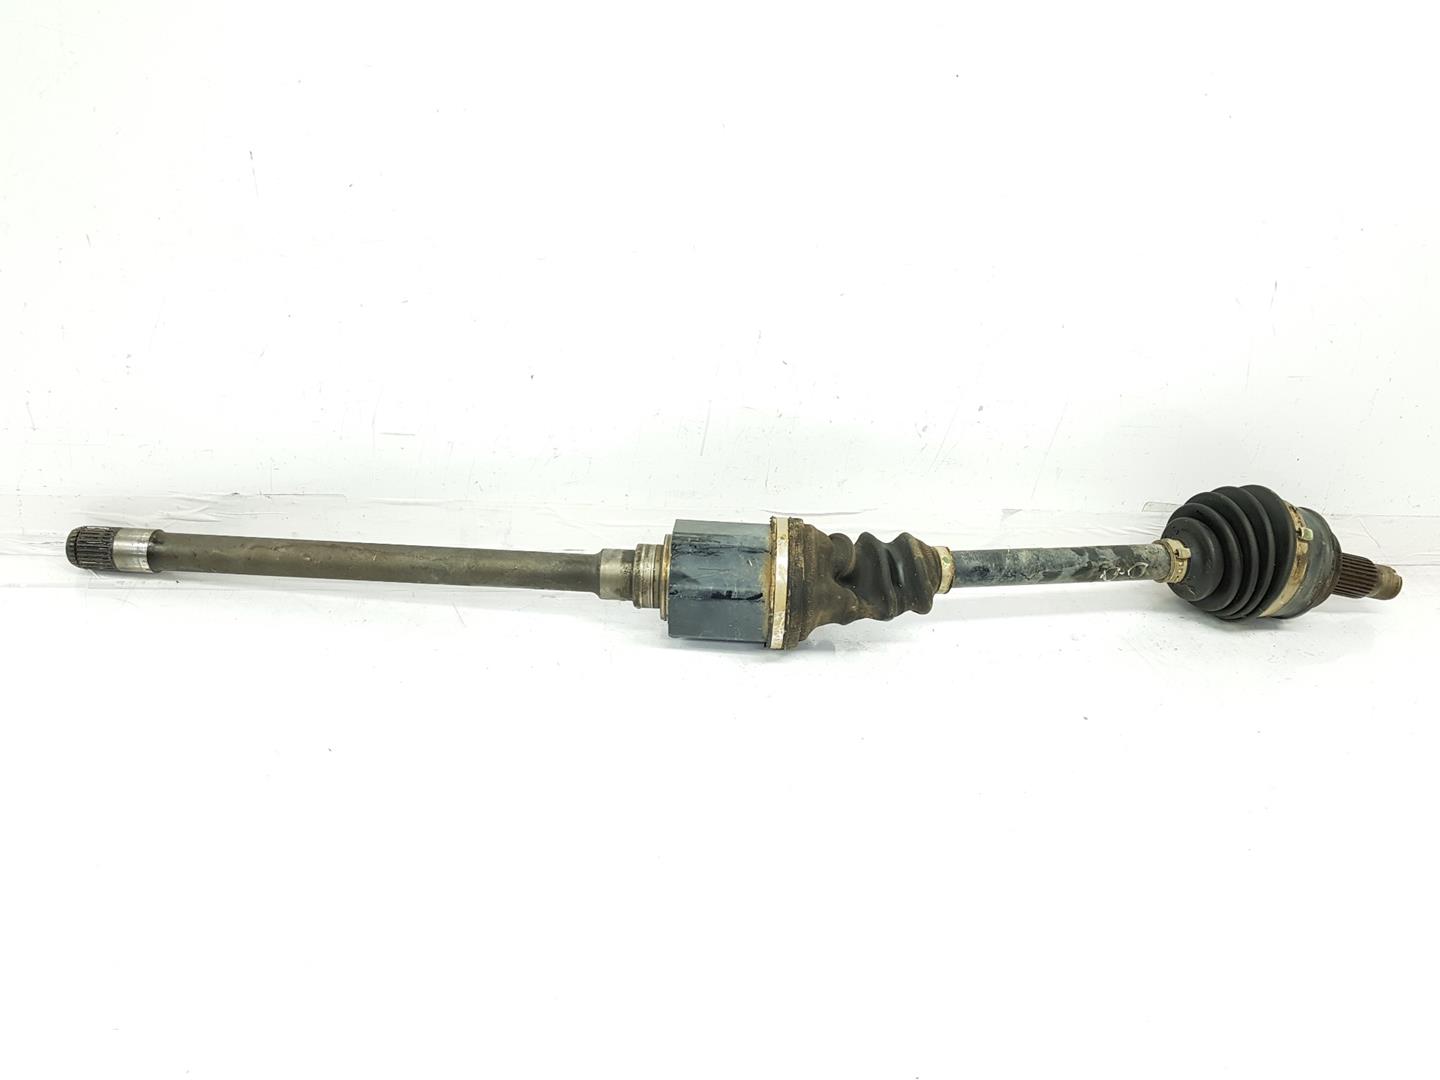 BMW X3 E83 (2003-2010) Front Right Driveshaft 33217529914, 7529914 24223067